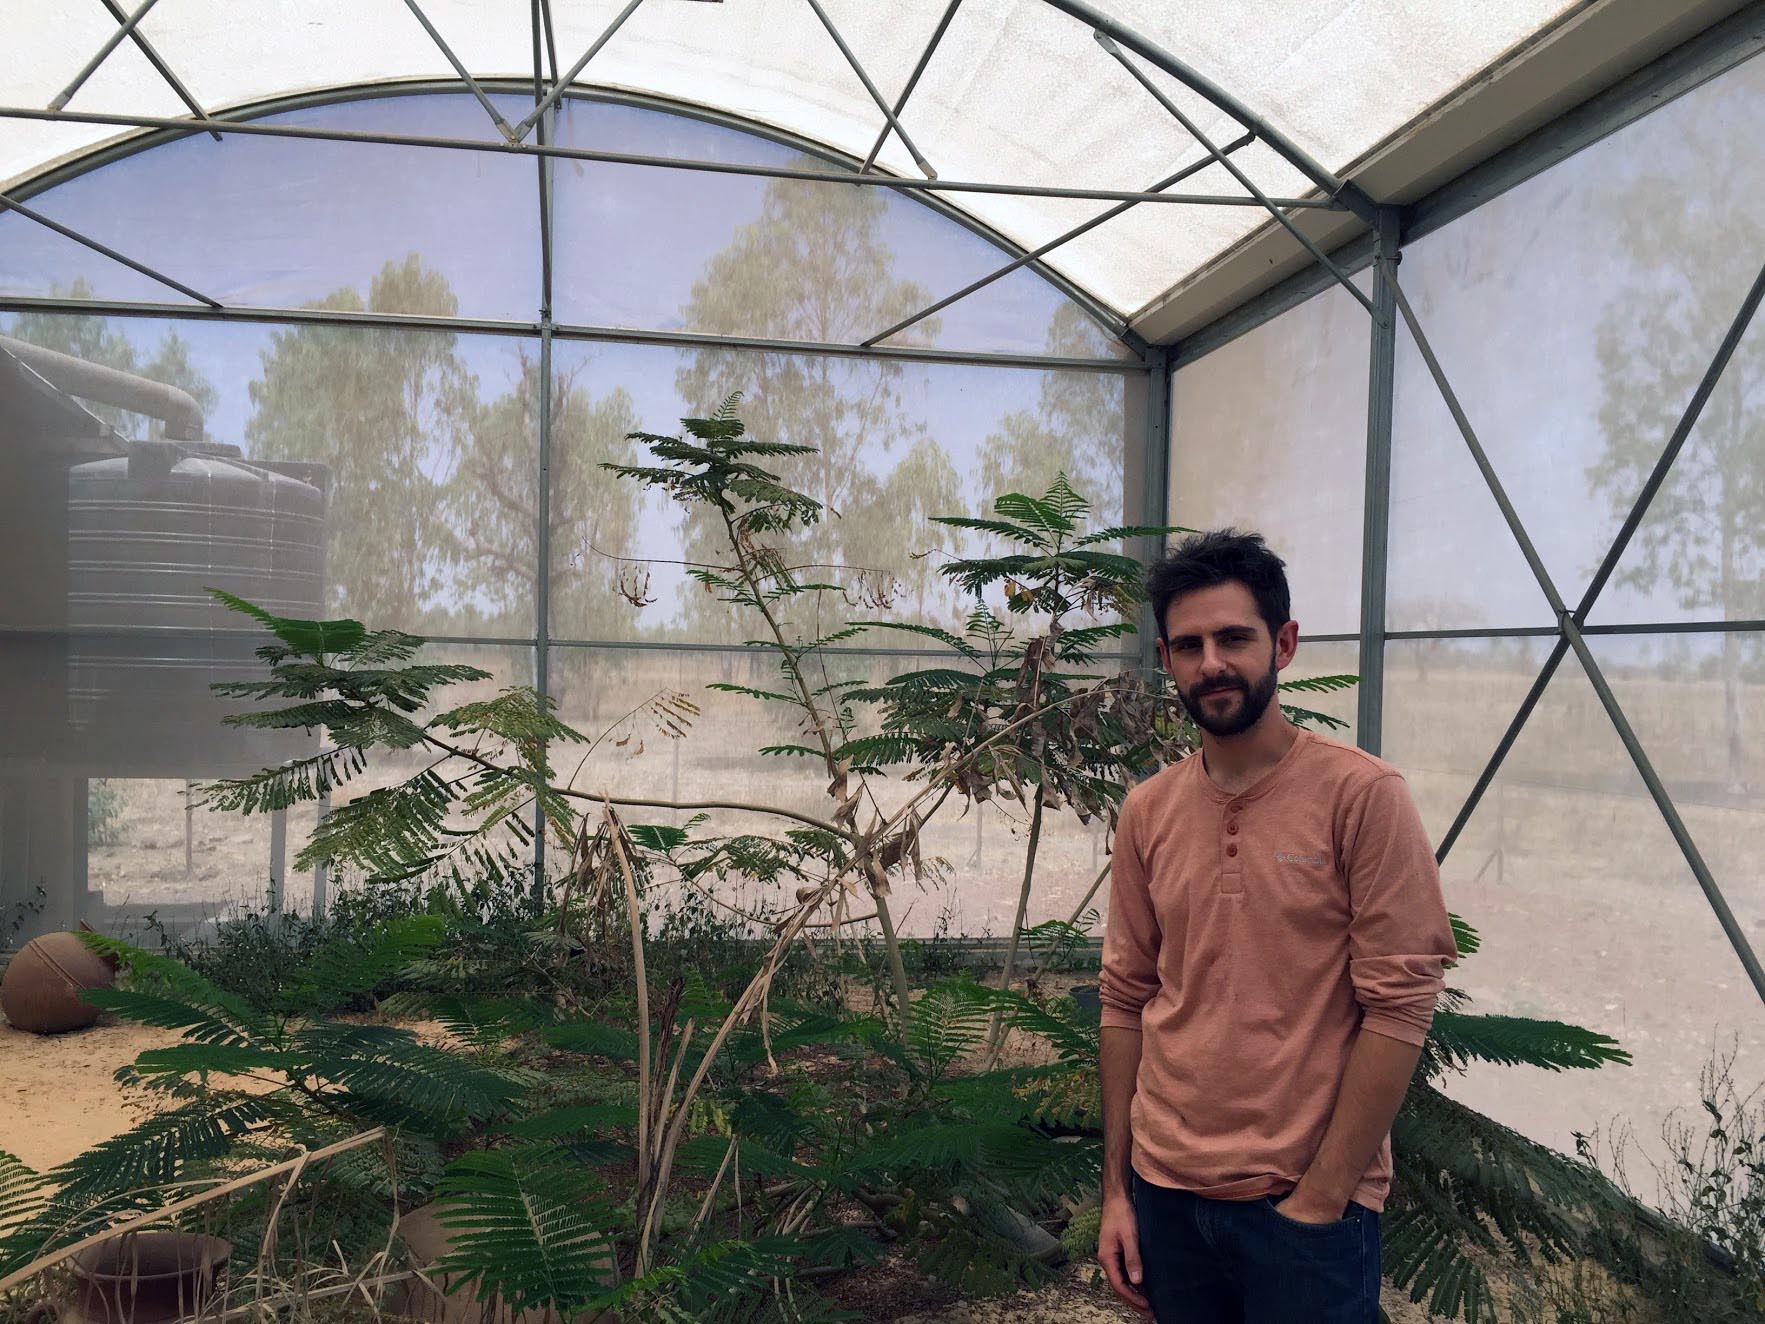  UMD Entomologist Brian Lovett, one of the lead authors of the 2019 AAAS Newcomb Cleveland Prize-winning paper, stands inside MosquitoSphere, a roughly 6,550 square-foot screened-in structure in Burkino Faso, built to simulate a village setting that includes plants, huts, small pools of water and a food source for mosquitos. Photo credit: Etienne Bilgo (Click image to download hi-res version.) Click image to download hi-res version.
